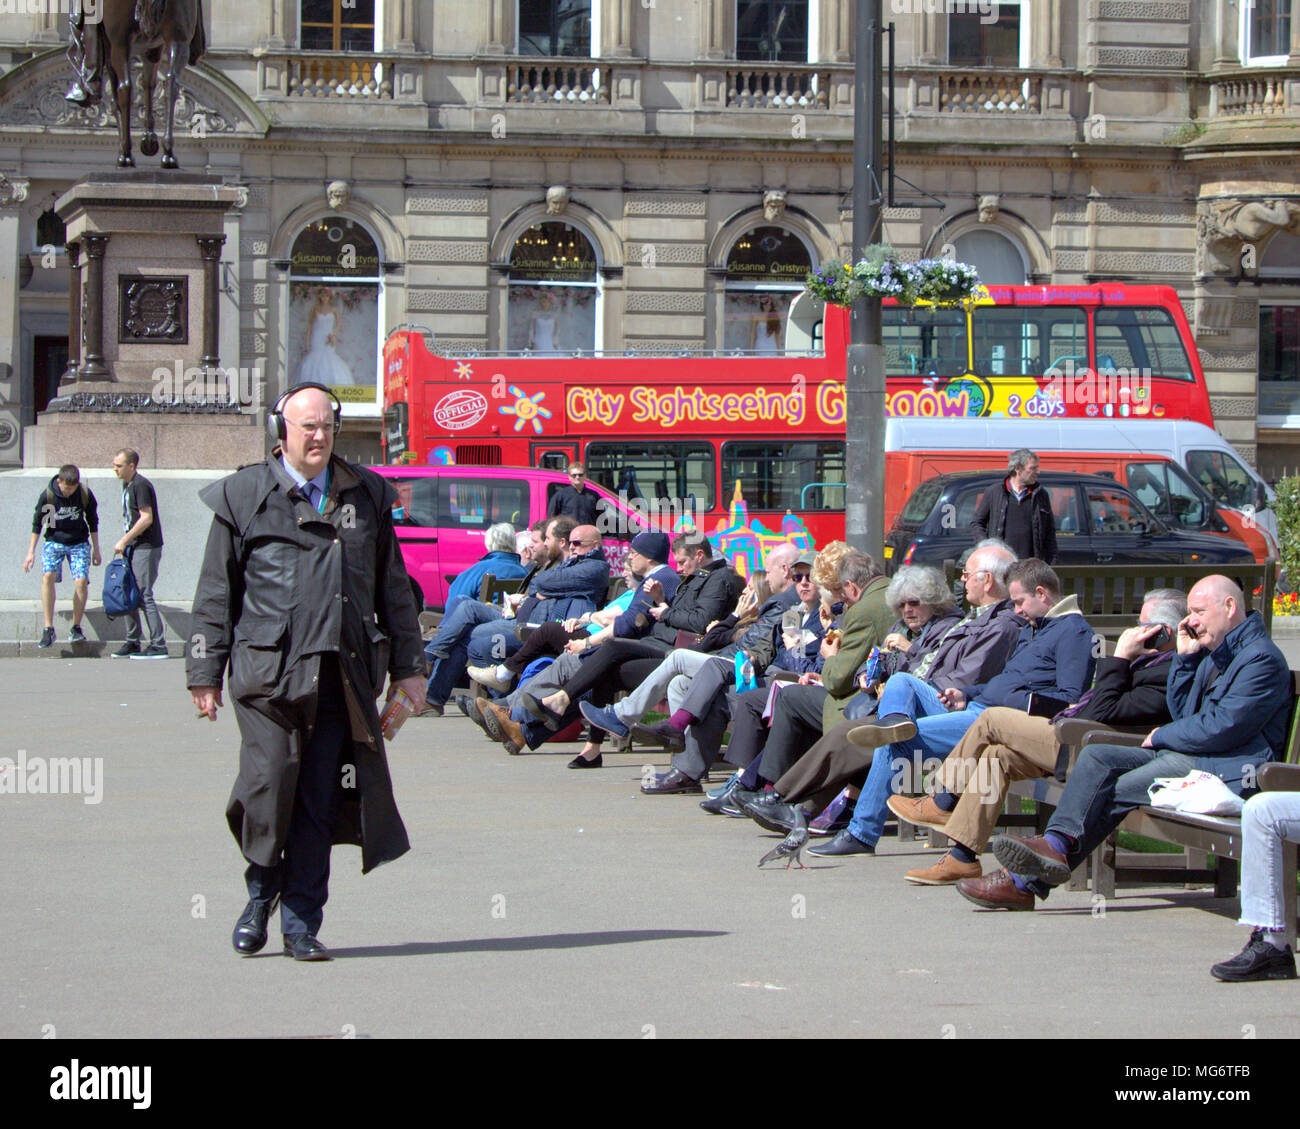 Glasgow, Scotland, UK 27th April. UK Weather old man with headphones oap : city sightseeing Glasgow bus with tourists Sunshine comes to the city as the locals and tourists enjoy the hot weather in George Square at the heart of the city. Gerard Ferry/Alamy news Stock Photo